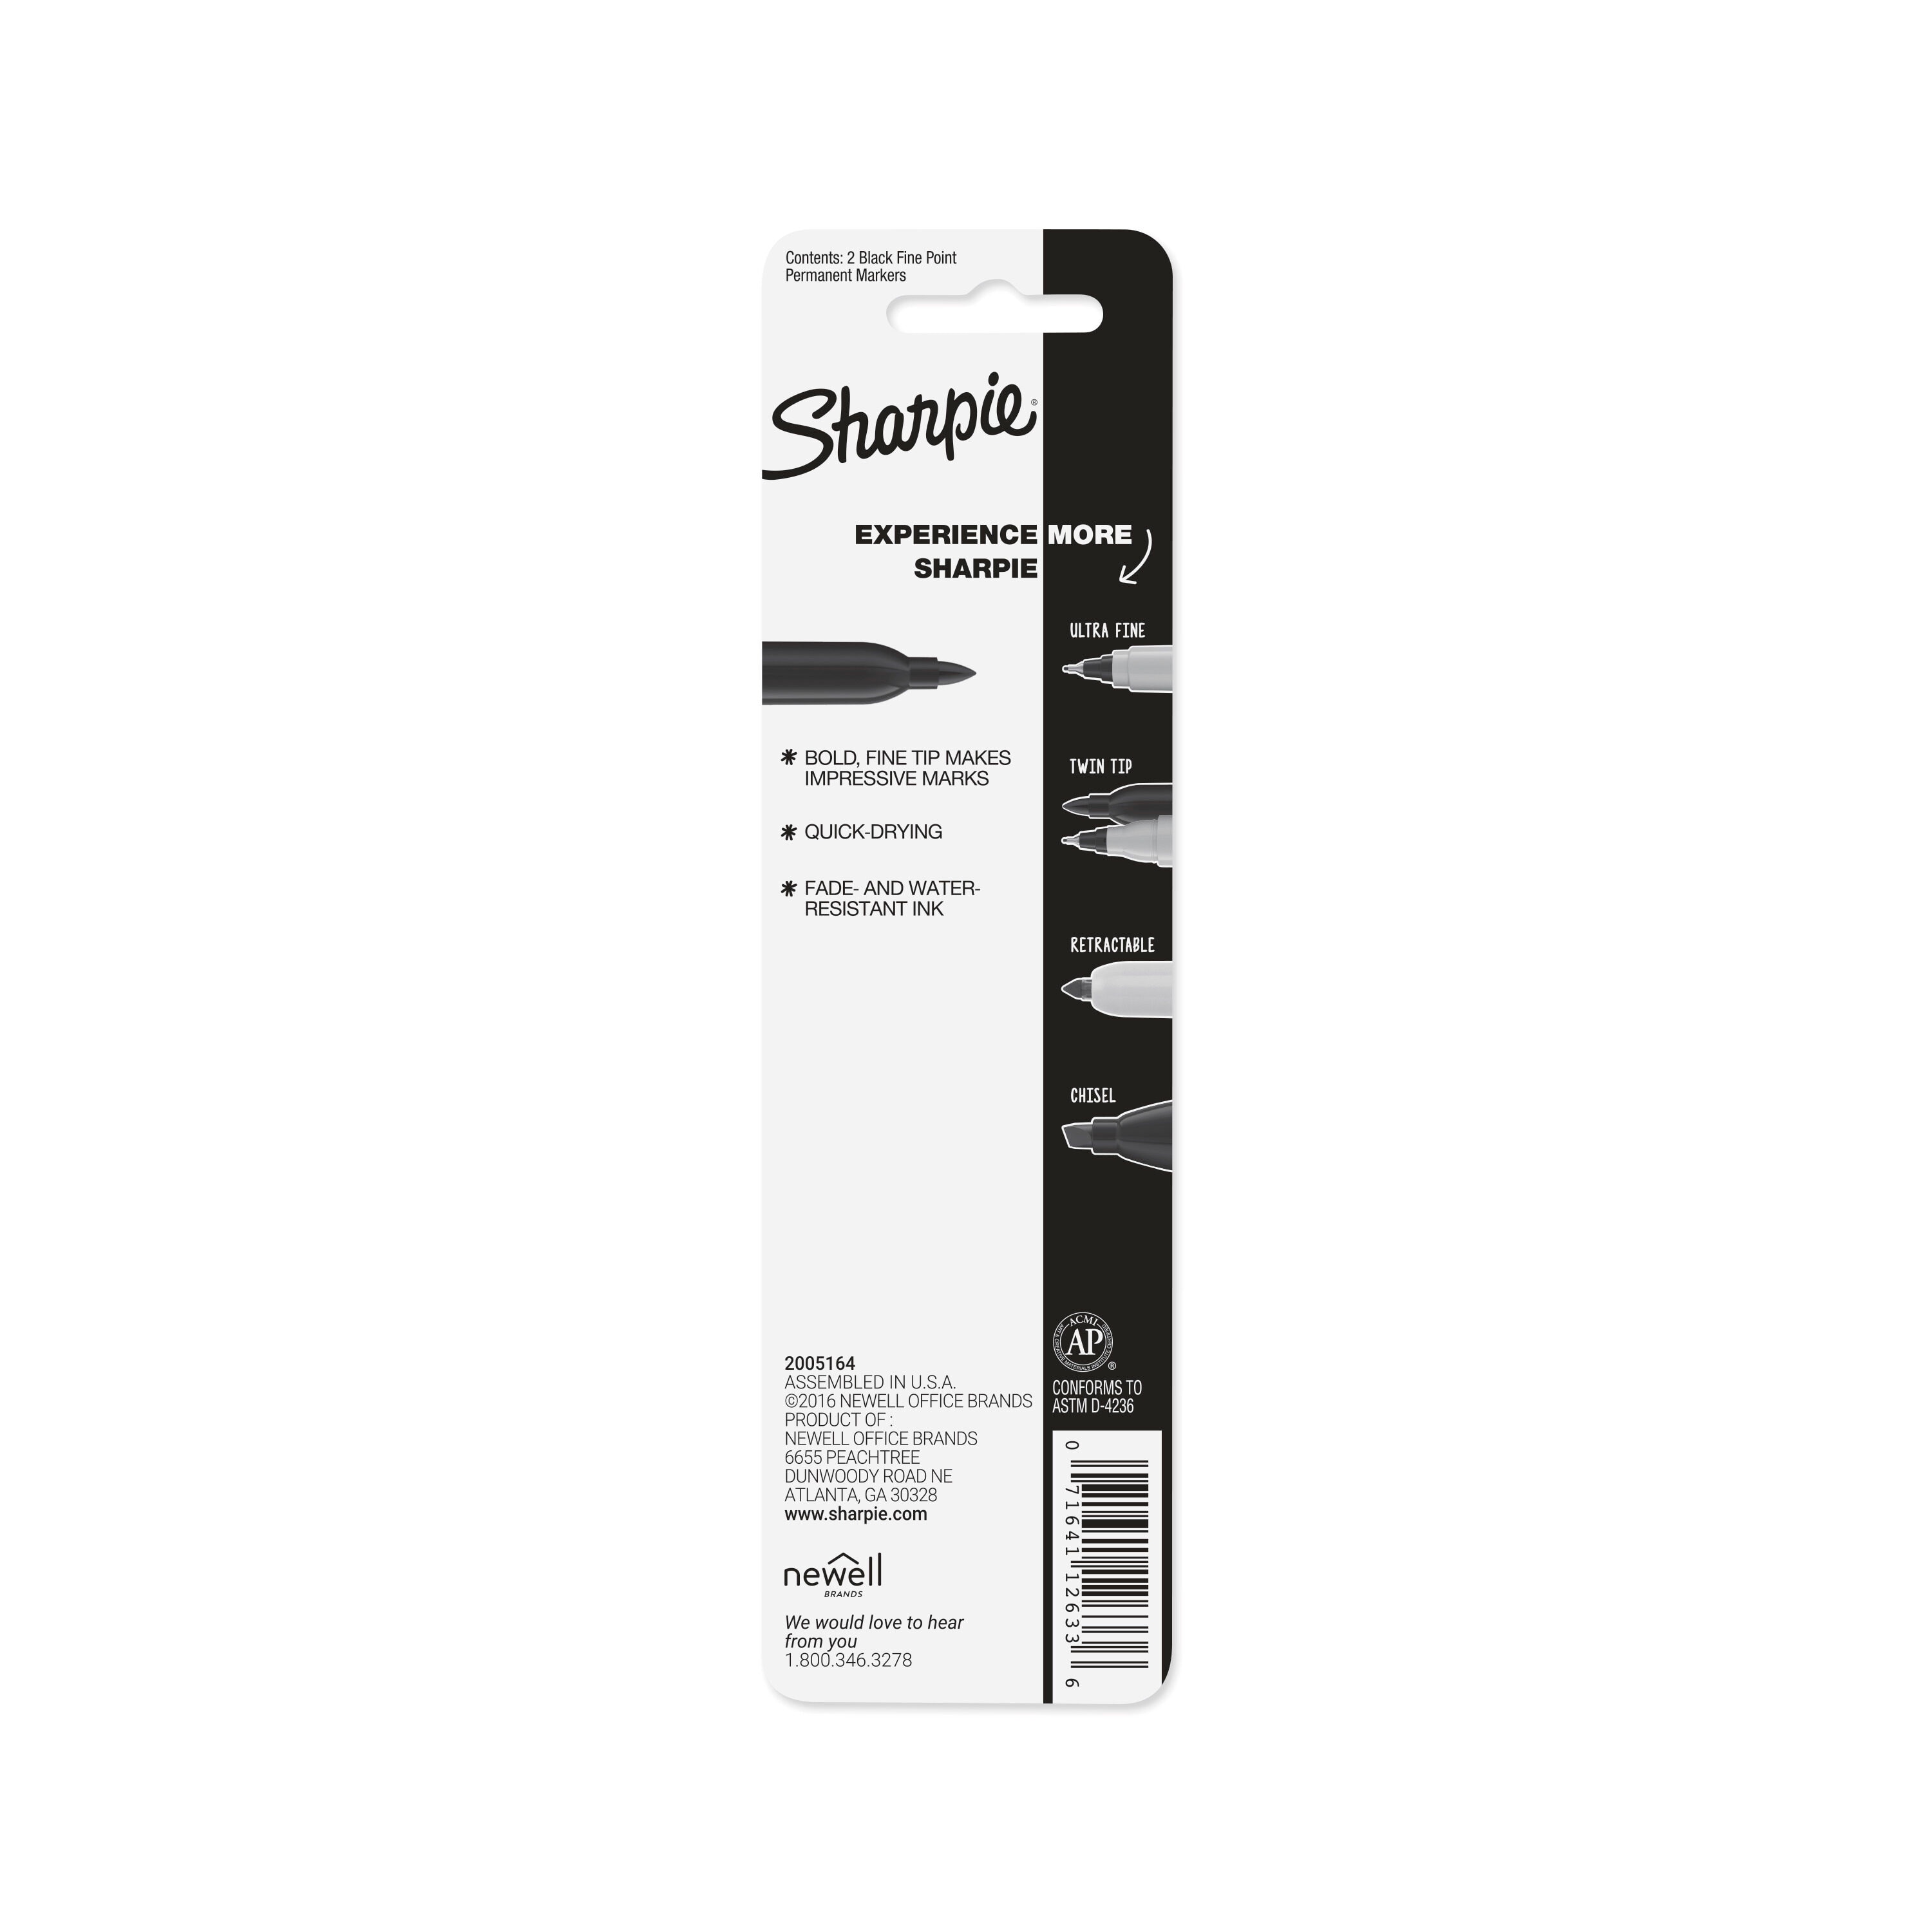 Sharpie 2 Pack - Black/Gold - October's Very Own